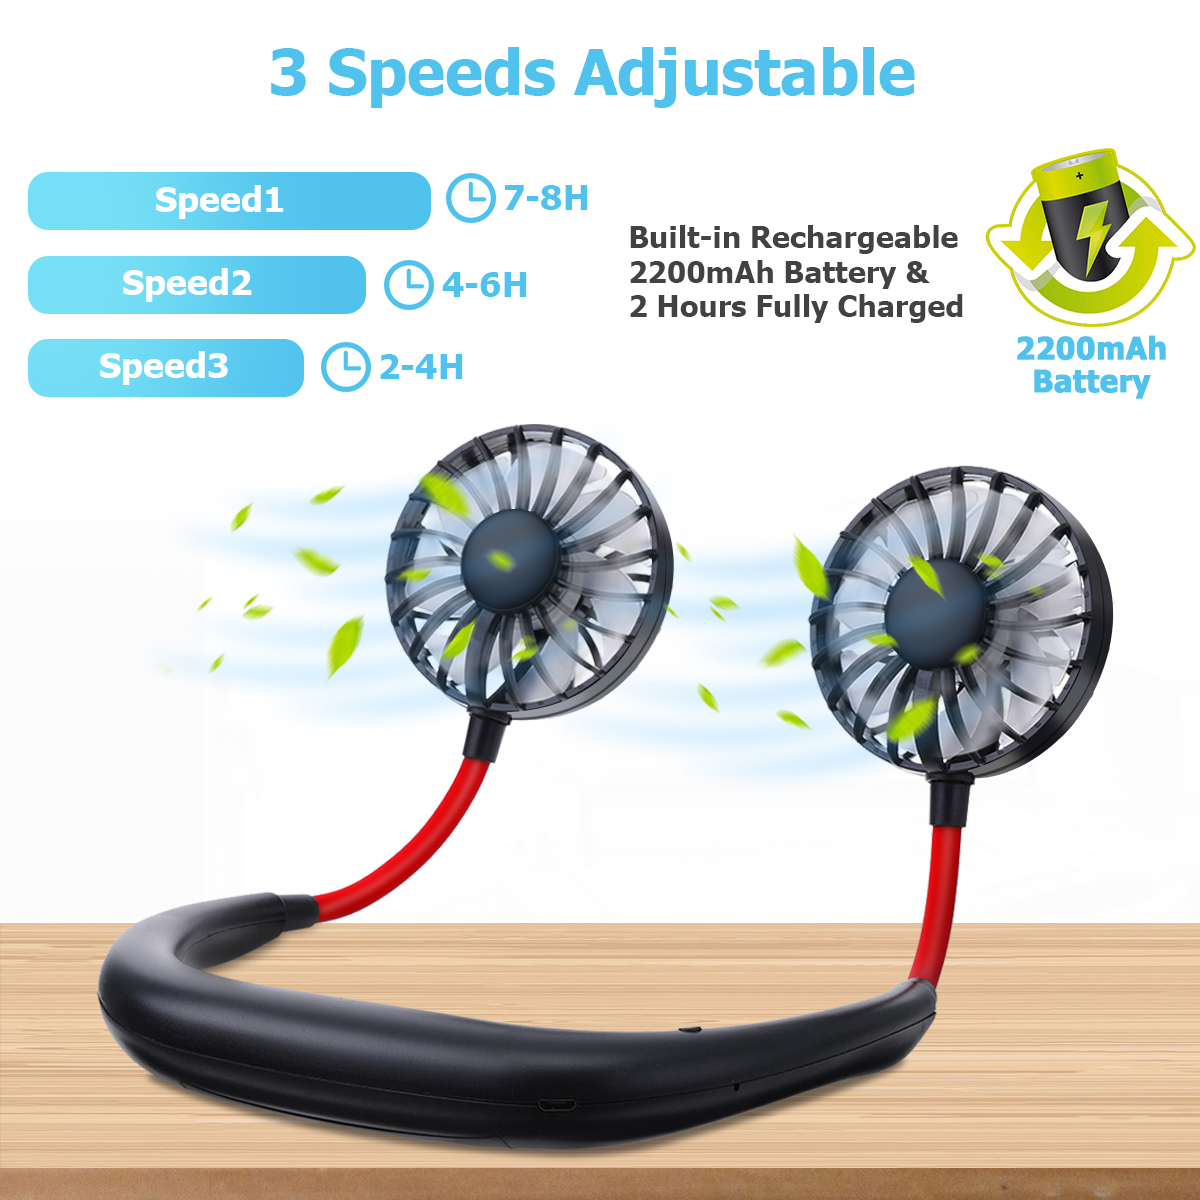 Portable-Mini-Fan-Neckband-Lazy-Neck-Hanging-Style-Cooling-Air-USB-Rechargeable-1942333-3